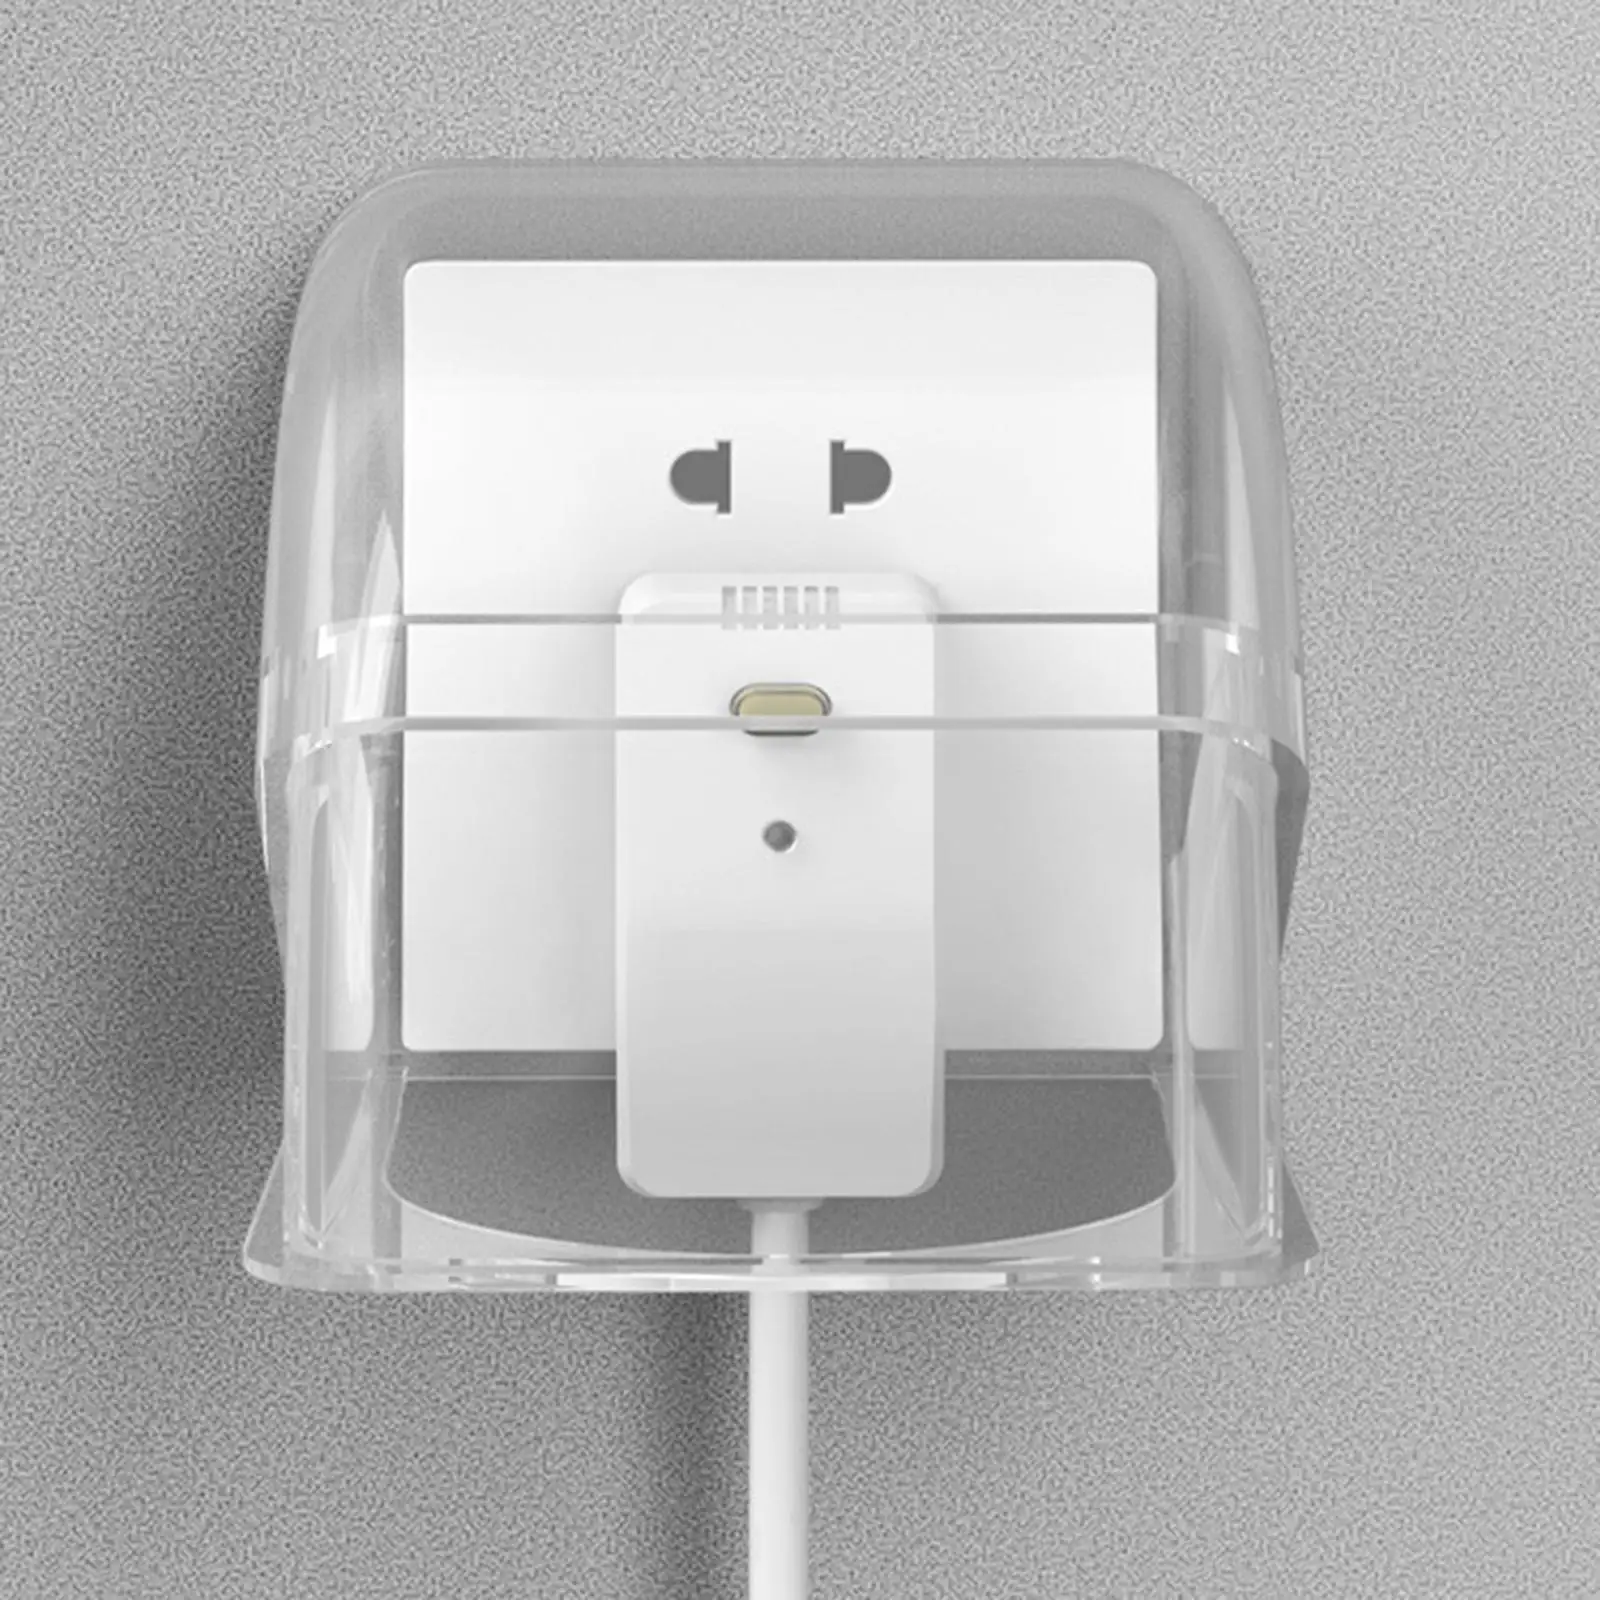 Bathroom Socket Box 86 Type Weatherproof Switch Protection Accs Outlet Cover